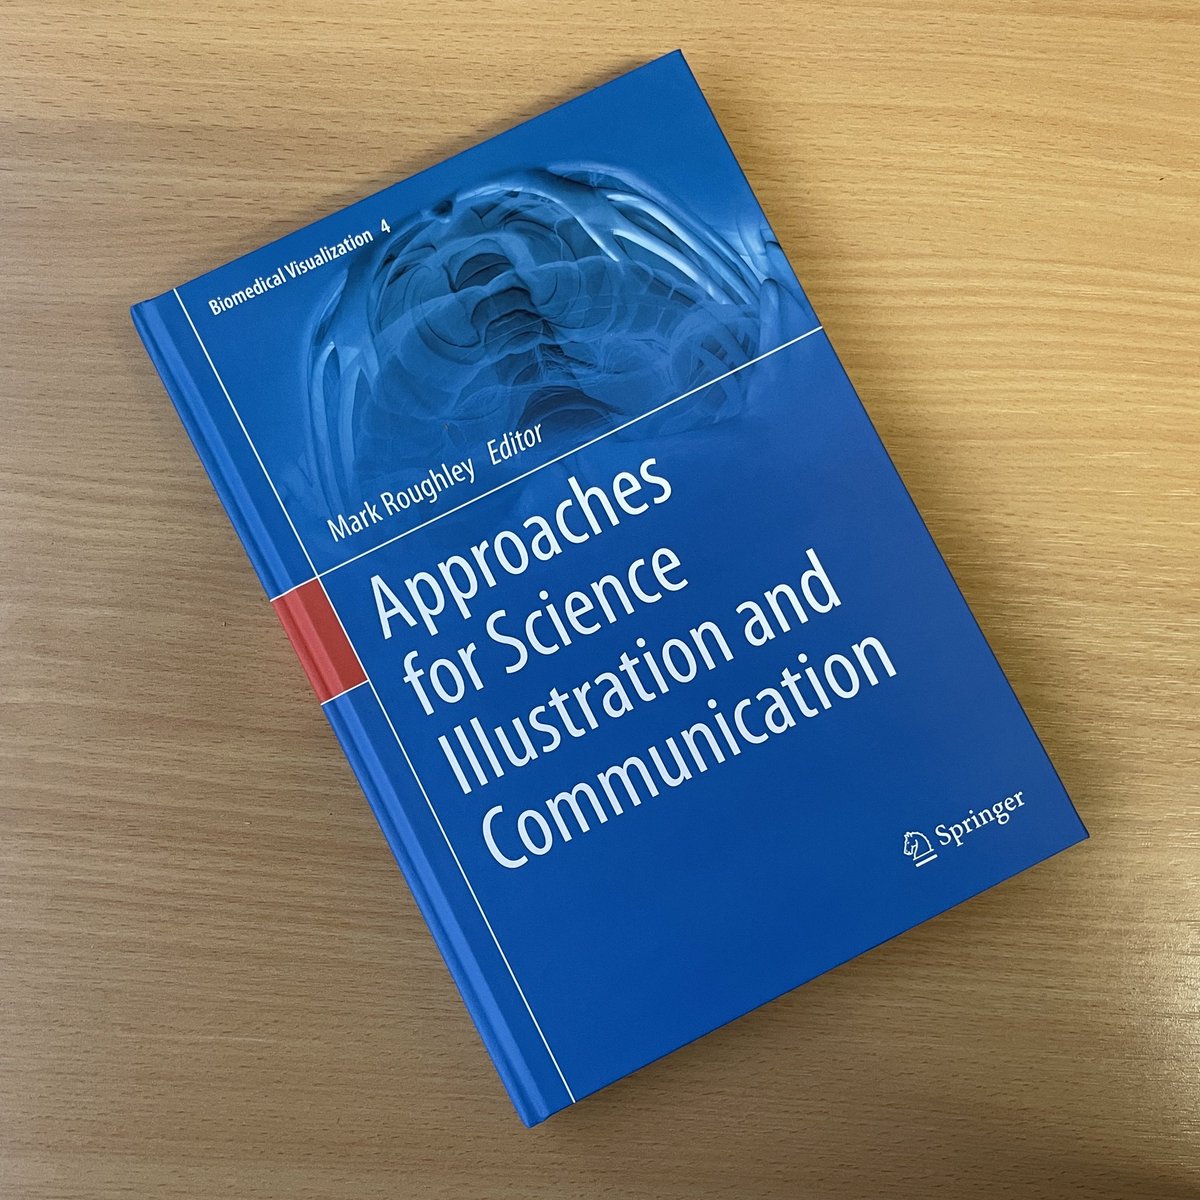 Received in the post today! Wonderful to hold the hard copy of ‘Approaches for Science Illustration and Communication’. Thanks to the authors, @medicalvis and @TheNeuroNetwork for bringing this volume to life!